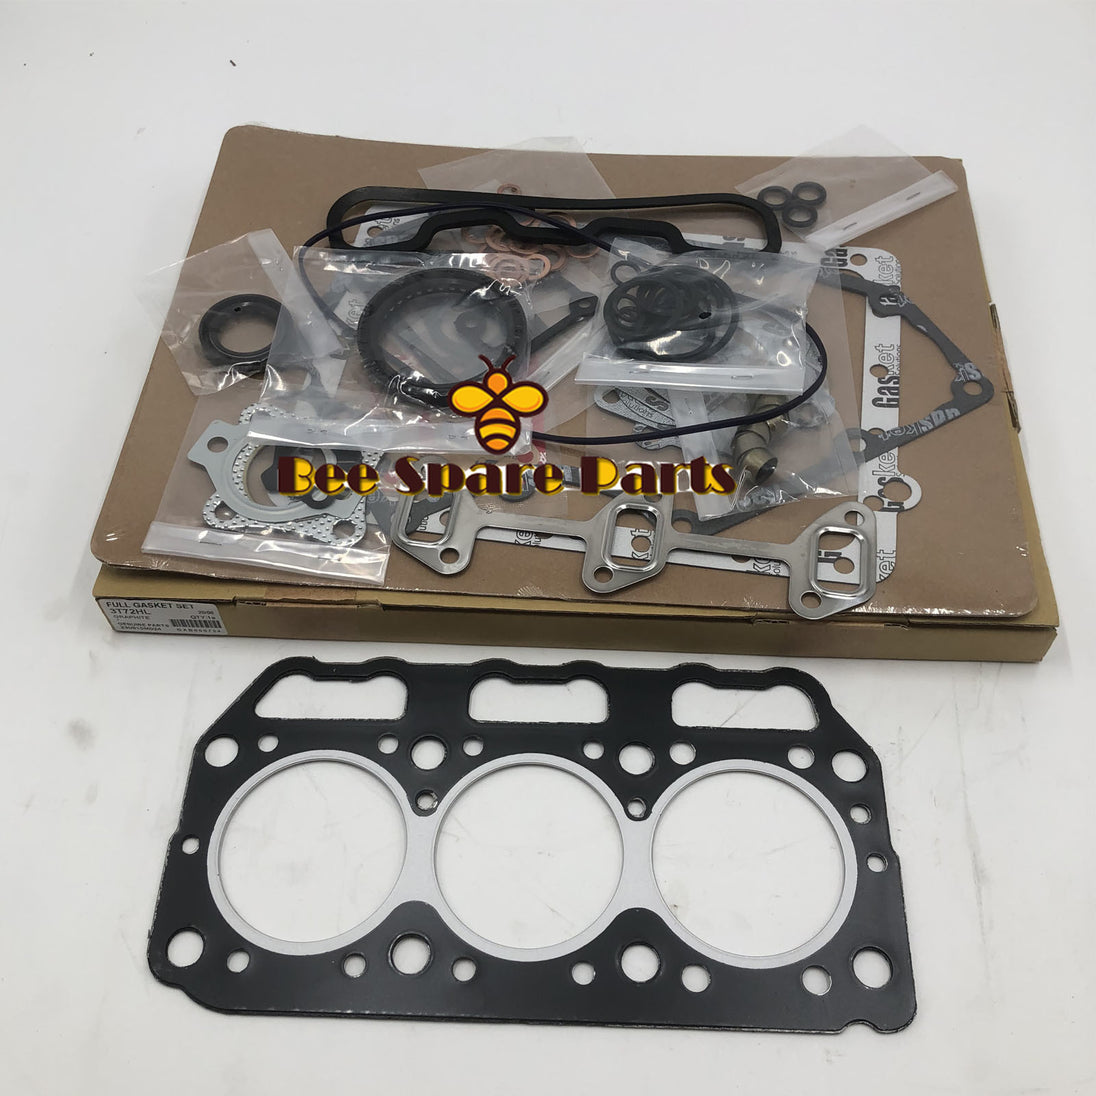 3T72HA Full Overhaul Gasket Kit With Cylinder Head Gasket 121550-01331 For Yanmar Engine Parts 3T72HA-A